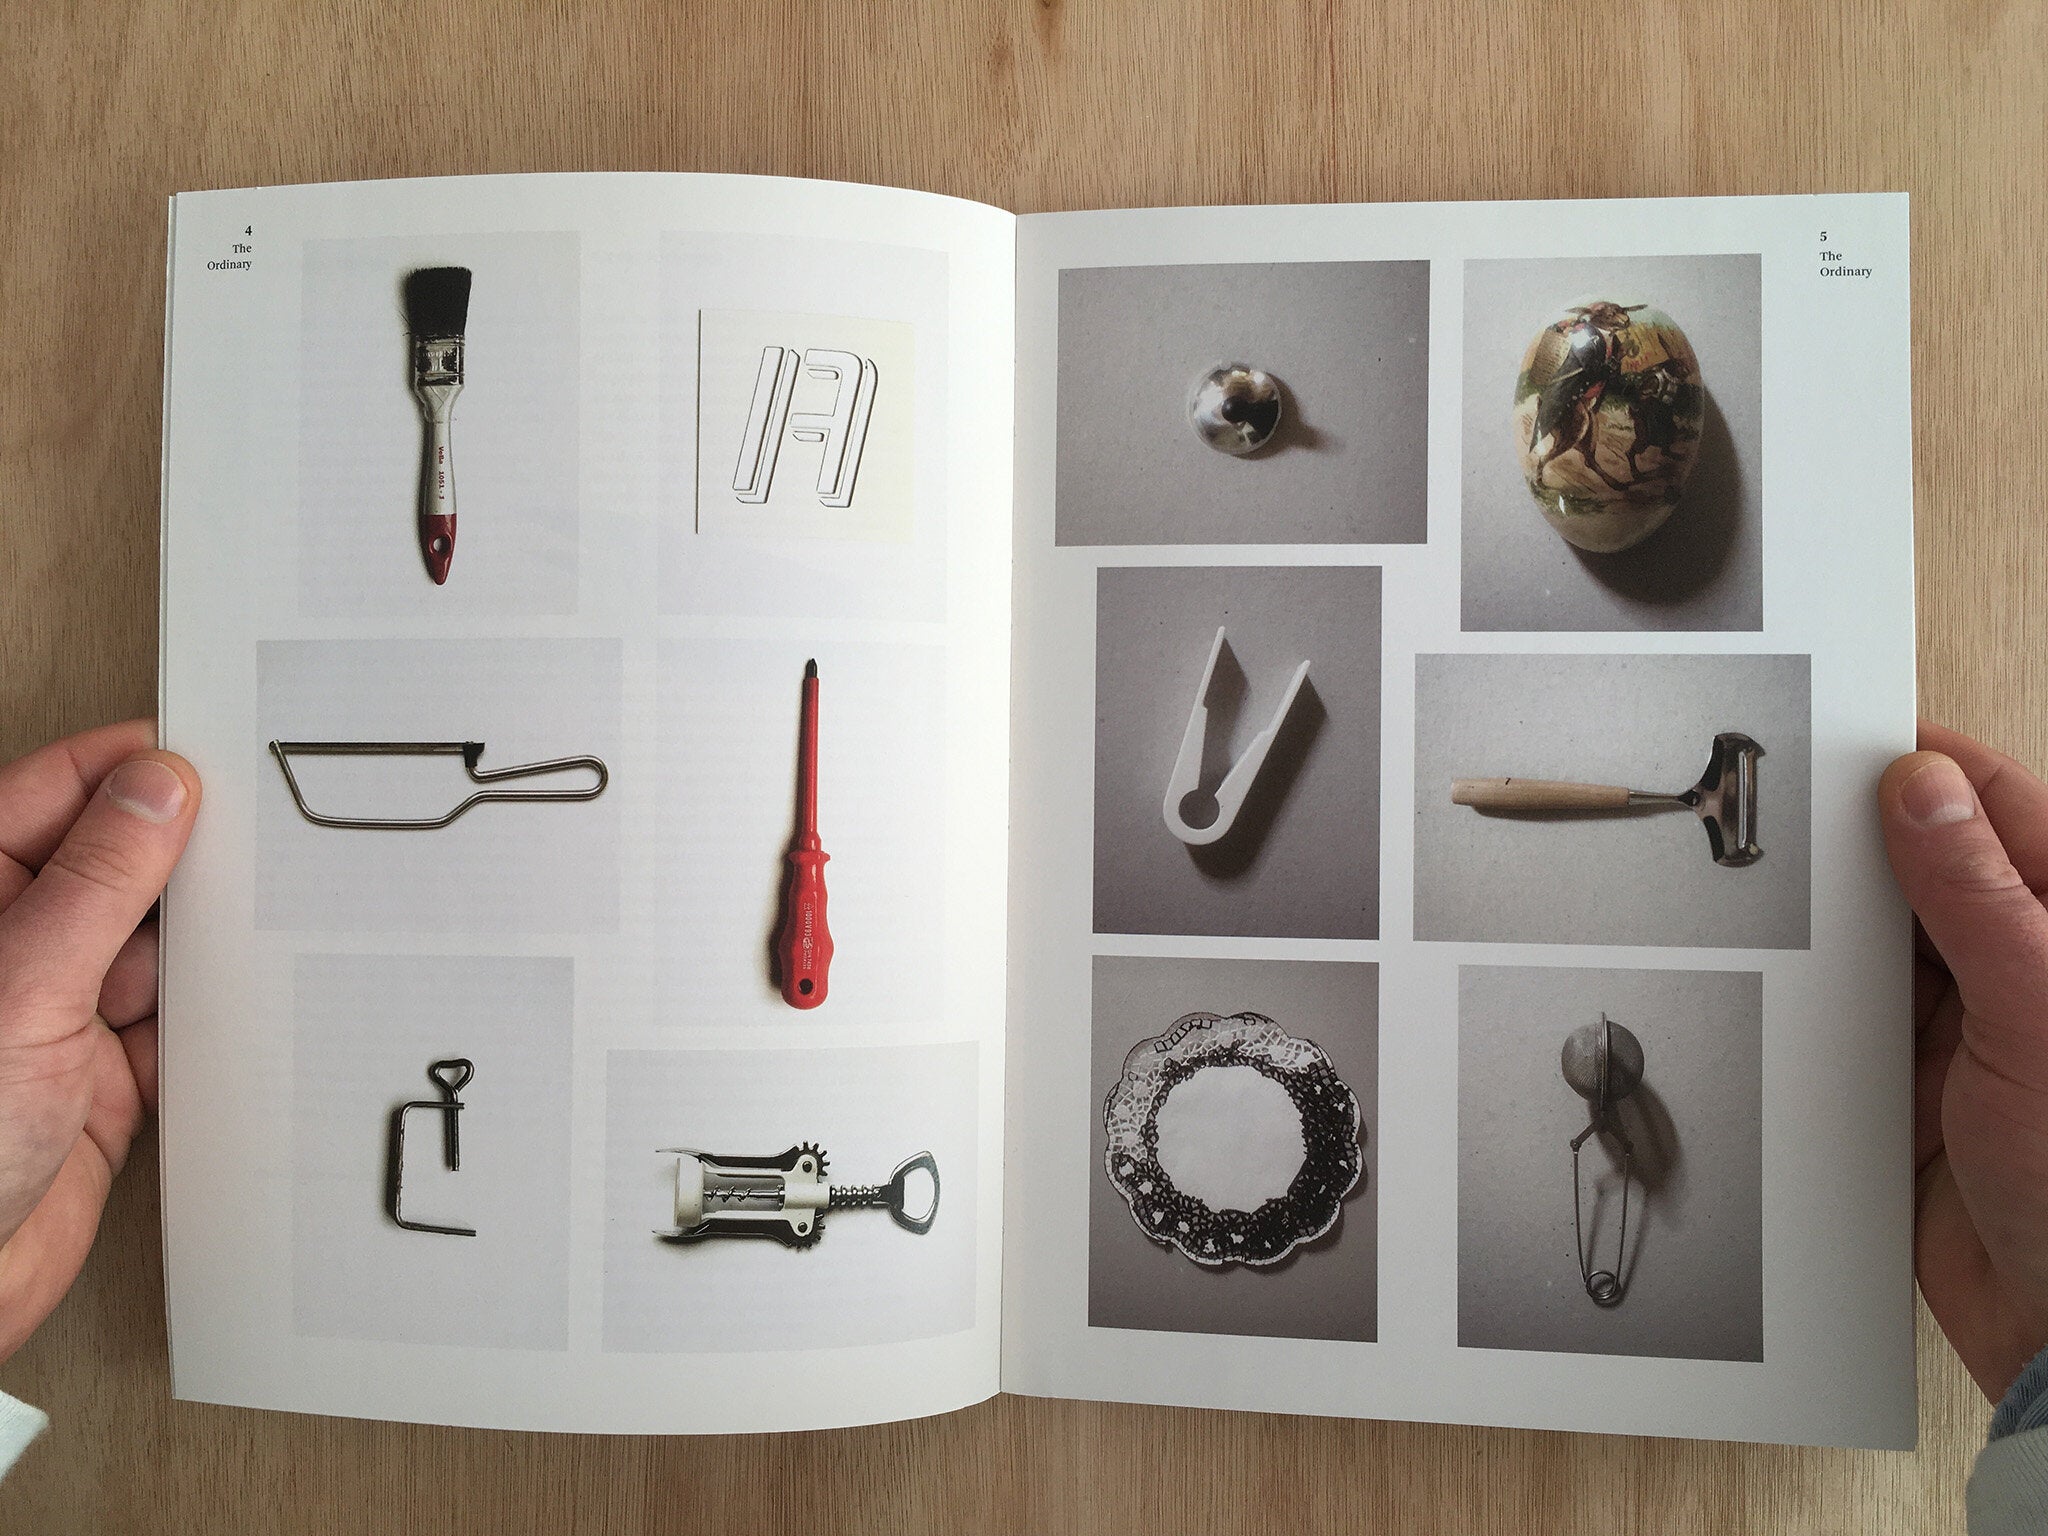 INVENTORY by Kasper Andreasen and Tine Melzer